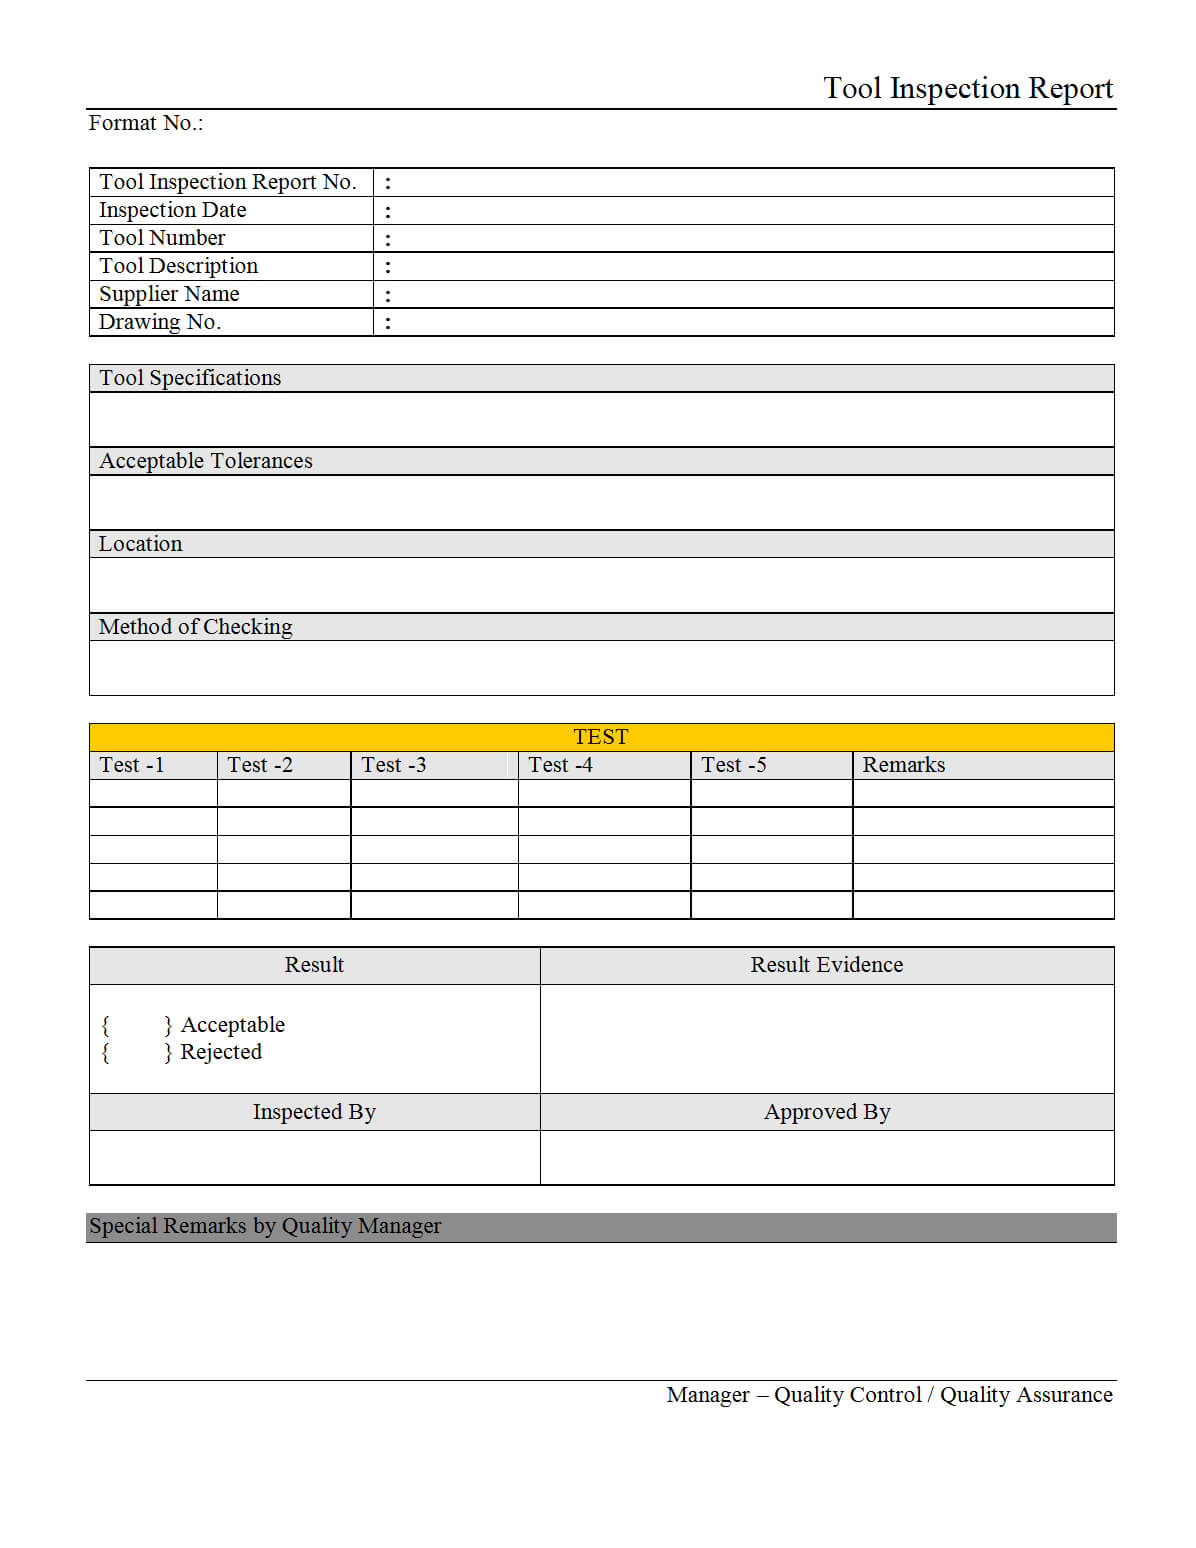 Tool Inspection Report – For Part Inspection Report Template